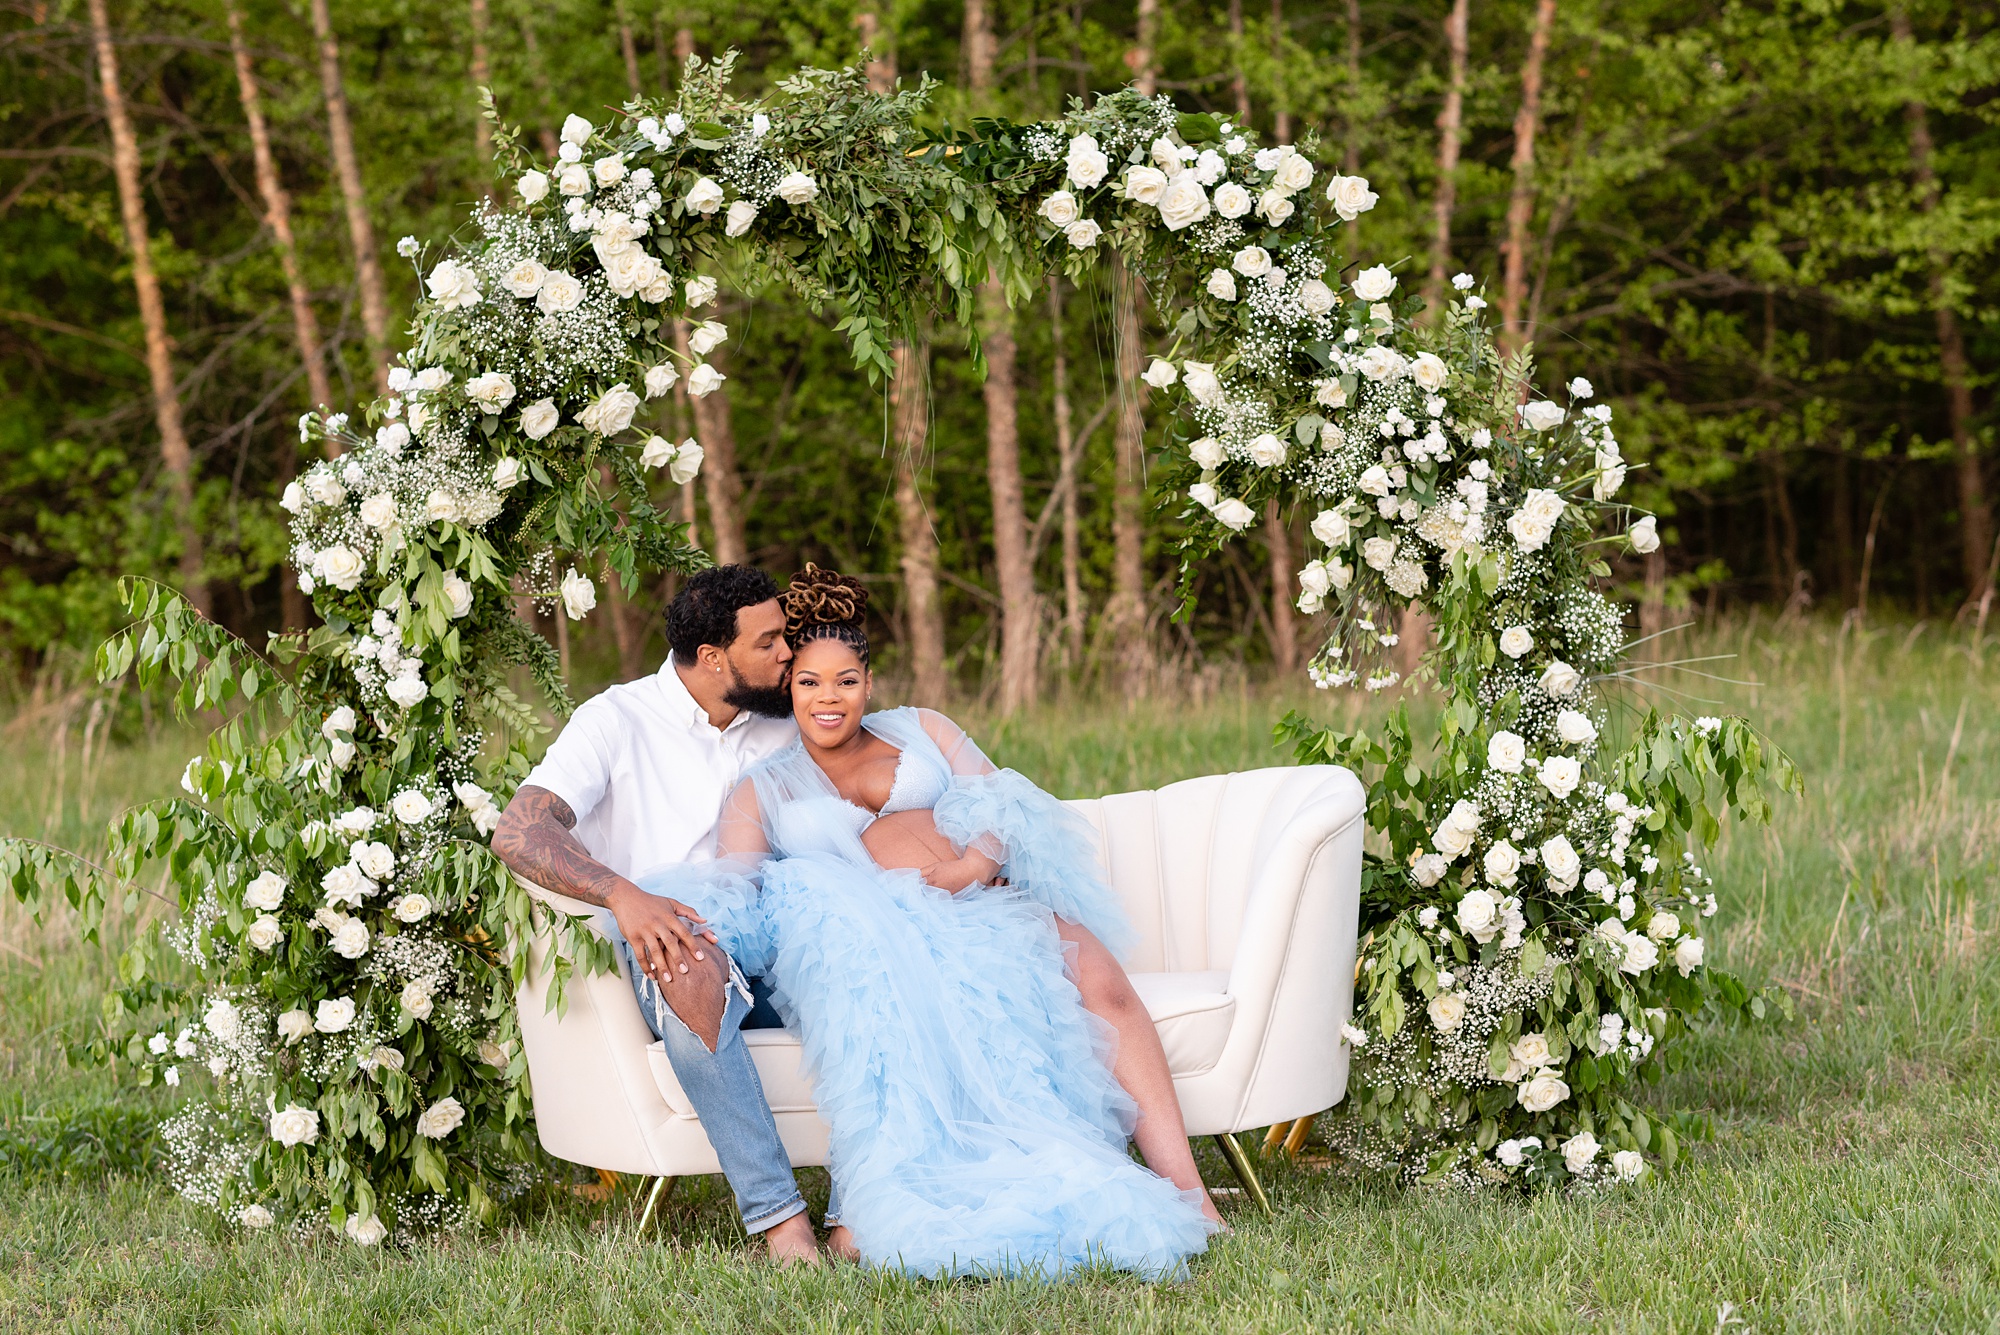 Washington DC maternity photographer photographs mom to be on couch with white floral arbor